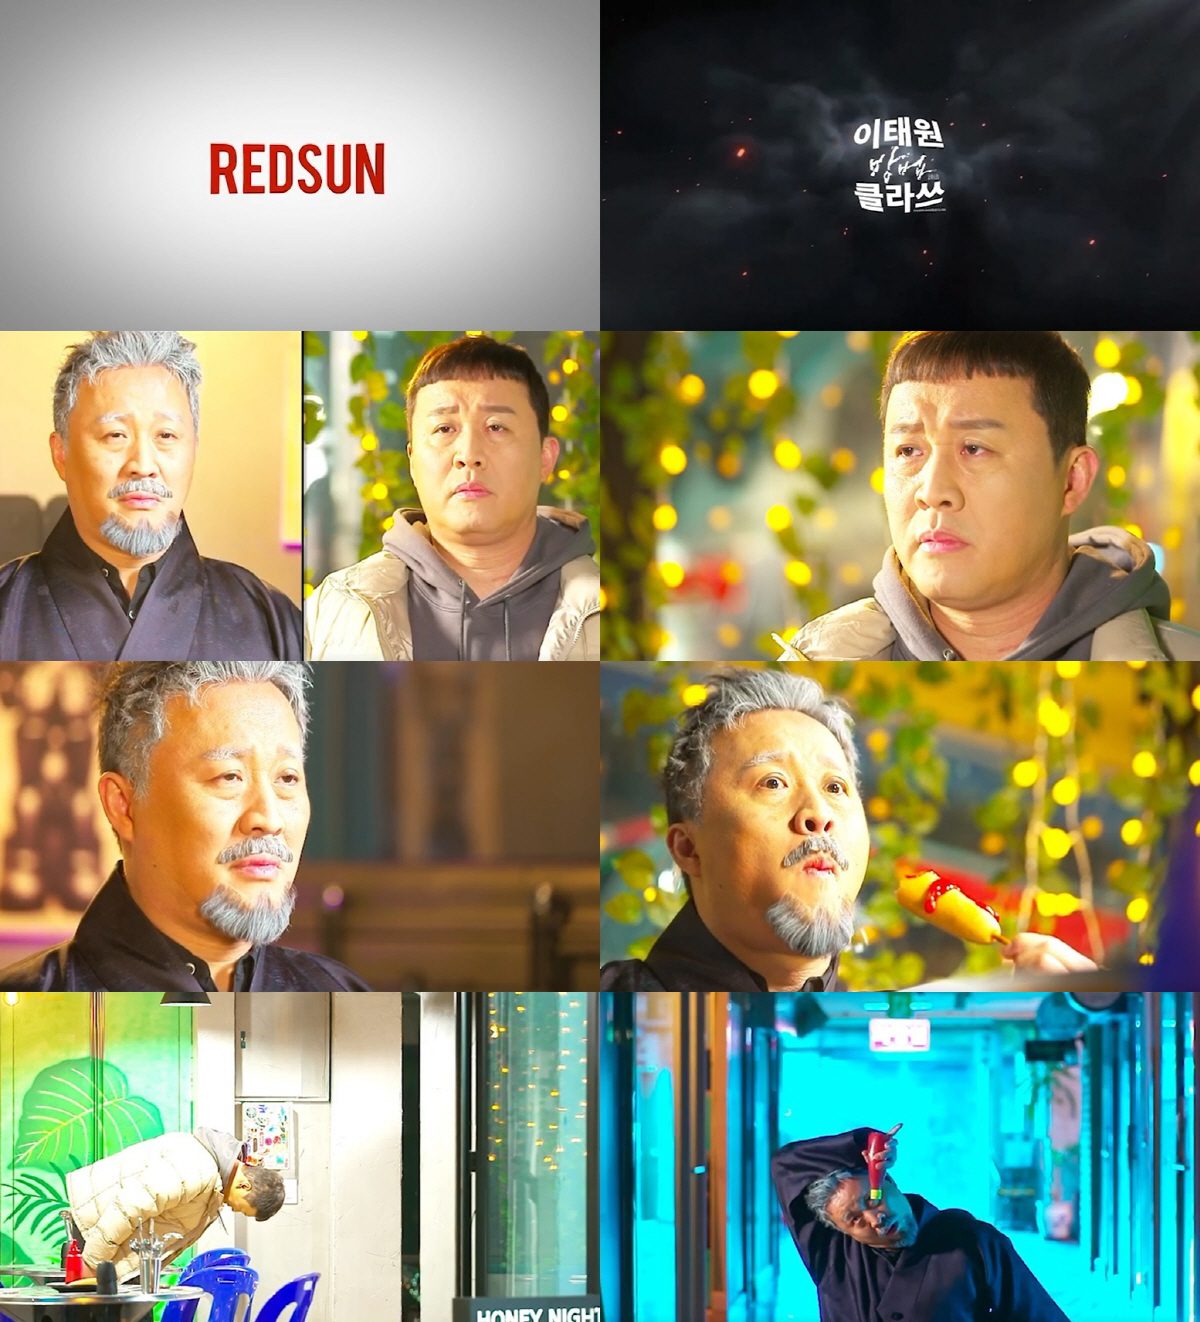 Broadcaster Jin-ha has been well received for releasing the parody video Itaewon How Clath through his personal channel and fully digesting the two roles.On the 25th, Jeong Jun-ha posted a video titled RED Line O Lizzynal Series - Itaewon How Clath through his YouTube channel Jeong Jun-has Somori soup (produced RED Sun Studio).In the released video, the RED Line OLizynal Series intro, a parody of the Netflix OLizynal series, first appears and focuses attention at once.Jin-ha has been transformed into Park Garoi and Chung Hoon in Itaewon How Clath, which collaborated on JTBC Itaewon Clath and tvN How dramas, which ended in favor of the audience.Parkaroi, transformed by Jin-ha, appears as a person who is working on the operation of Honey Night, a hot dog shop.Park Garoi, who met the Chung Hoon, a guest who visited Honey Night, laughed a big smile by parodying the famous ambassador, Do not judge yet, my revenge is 55 years old.Jin-ha also ordered the most confident menu to Parkaroi, which was disassembled as Chung Hoe, and Chung Hoe, who was surprised by the hot dog that was too delicious than he thought,You can not do it to me, , I should be hit by a dog barking sound that adds to my house, mysteries, and my bluffs. Behind such a Chung Hoe Park Garoi shouted, Goodbye, it was a honey night.As such, Jin-ha picked up the points of Park Sae-roi and Jang-chan in Itaewon Clath and smoothly digested the two-person acting and perfectly expressed the original sensibility.Itaewon How Clath Hidden Seal Point also attracts attention.Honey Night, which appeared in the video, was actually filmed in the drama Sanbam Pocha of Itaewon, and at the end of the video, Chung Hoon suddenly changed into a bizarre feeling and created a sense of fear. It is a parody of the actor Jo Min-soos Subway God.The RED Sun Studio, which has YG Entertainment, is receiving favorable reviews for producing high quality images with every detail.Jin-ha said, I usually like Itaewon Clath and How so much that I suggested parody it myself.I wanted to do too much to ask for help from the best staff in Korea, and I am grateful that the staff helped me.I have enjoyed shooting, so I would like you to have fun with a light heart. As such, the publics interest in the Jeong Jun-has Somori soup channel, which provides new and exciting contents every time, is getting hotter.Jin-ha has been receiving a modifier of content rich by showing various contents from Kimchi-jeon case reunion video which recorded 240,000 views to confrontation with Choi Hyun-mi which has recently received attention.The YouTube channel of Jin Jun-ha, which is loved by reflecting the needs of viewers, attracts attention with its high-quality contents to be shown in the future.Meanwhile, Jeong Jun-has Somori soup has been steadily increasing its fandom since its opening in February, and the number of subscribers has reached 30,000.